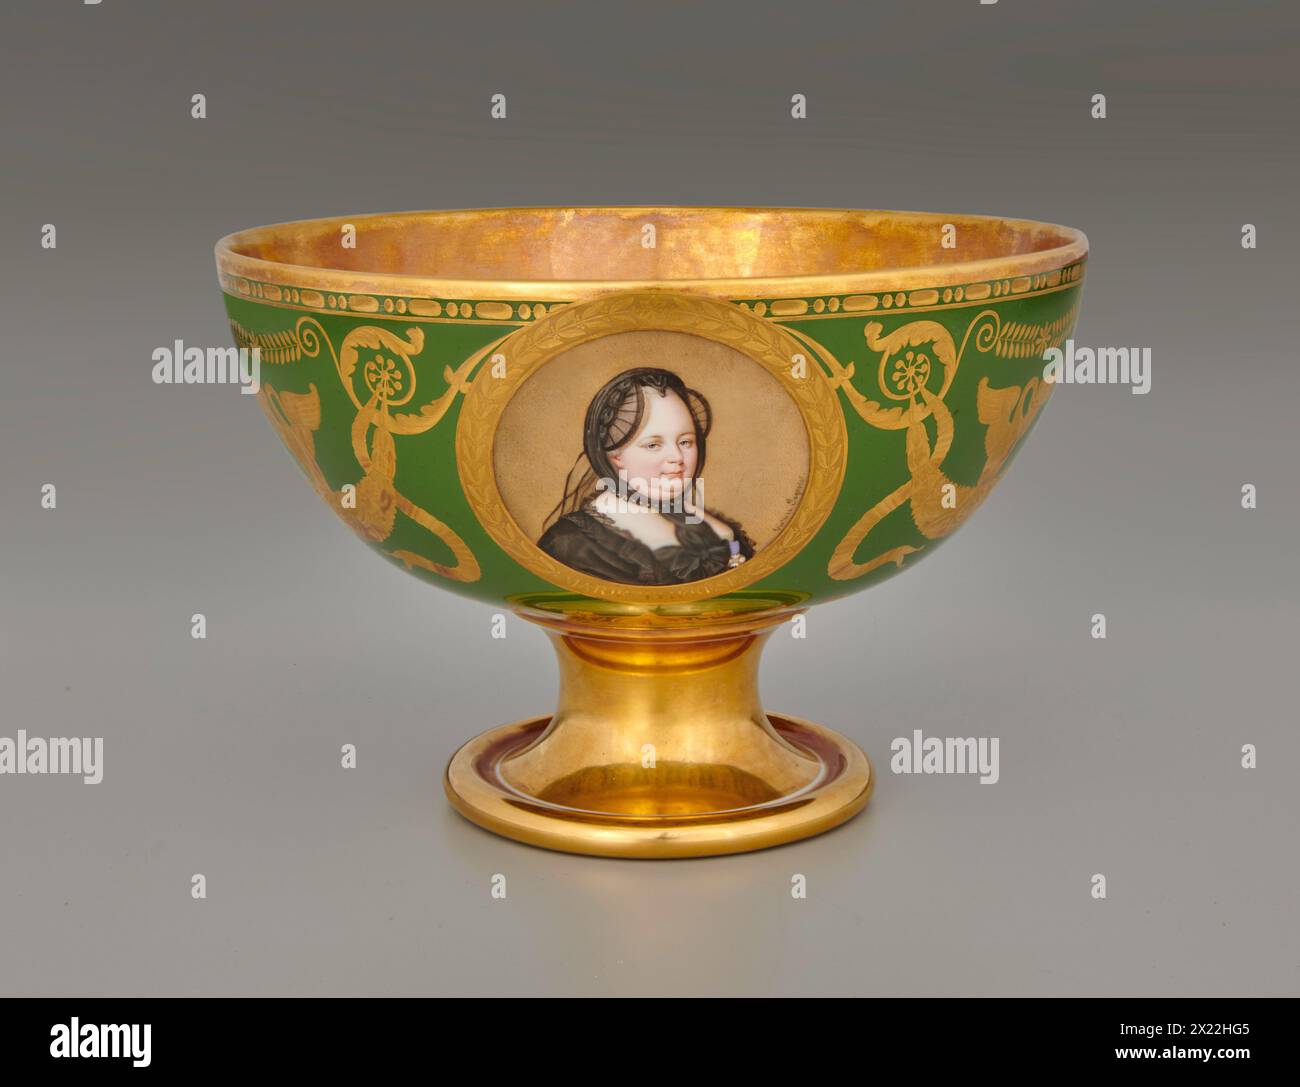 Bowl (Jatte &#xc0; Fruits H&#xe9;misph&#xe9;rique) With Portraits Of Catherine The Great Of Russia (1729-1796), Maria Theresa Of Austria (1717-1780), And Blanche Of Castille (1188-1252), 1812. Stock Photo